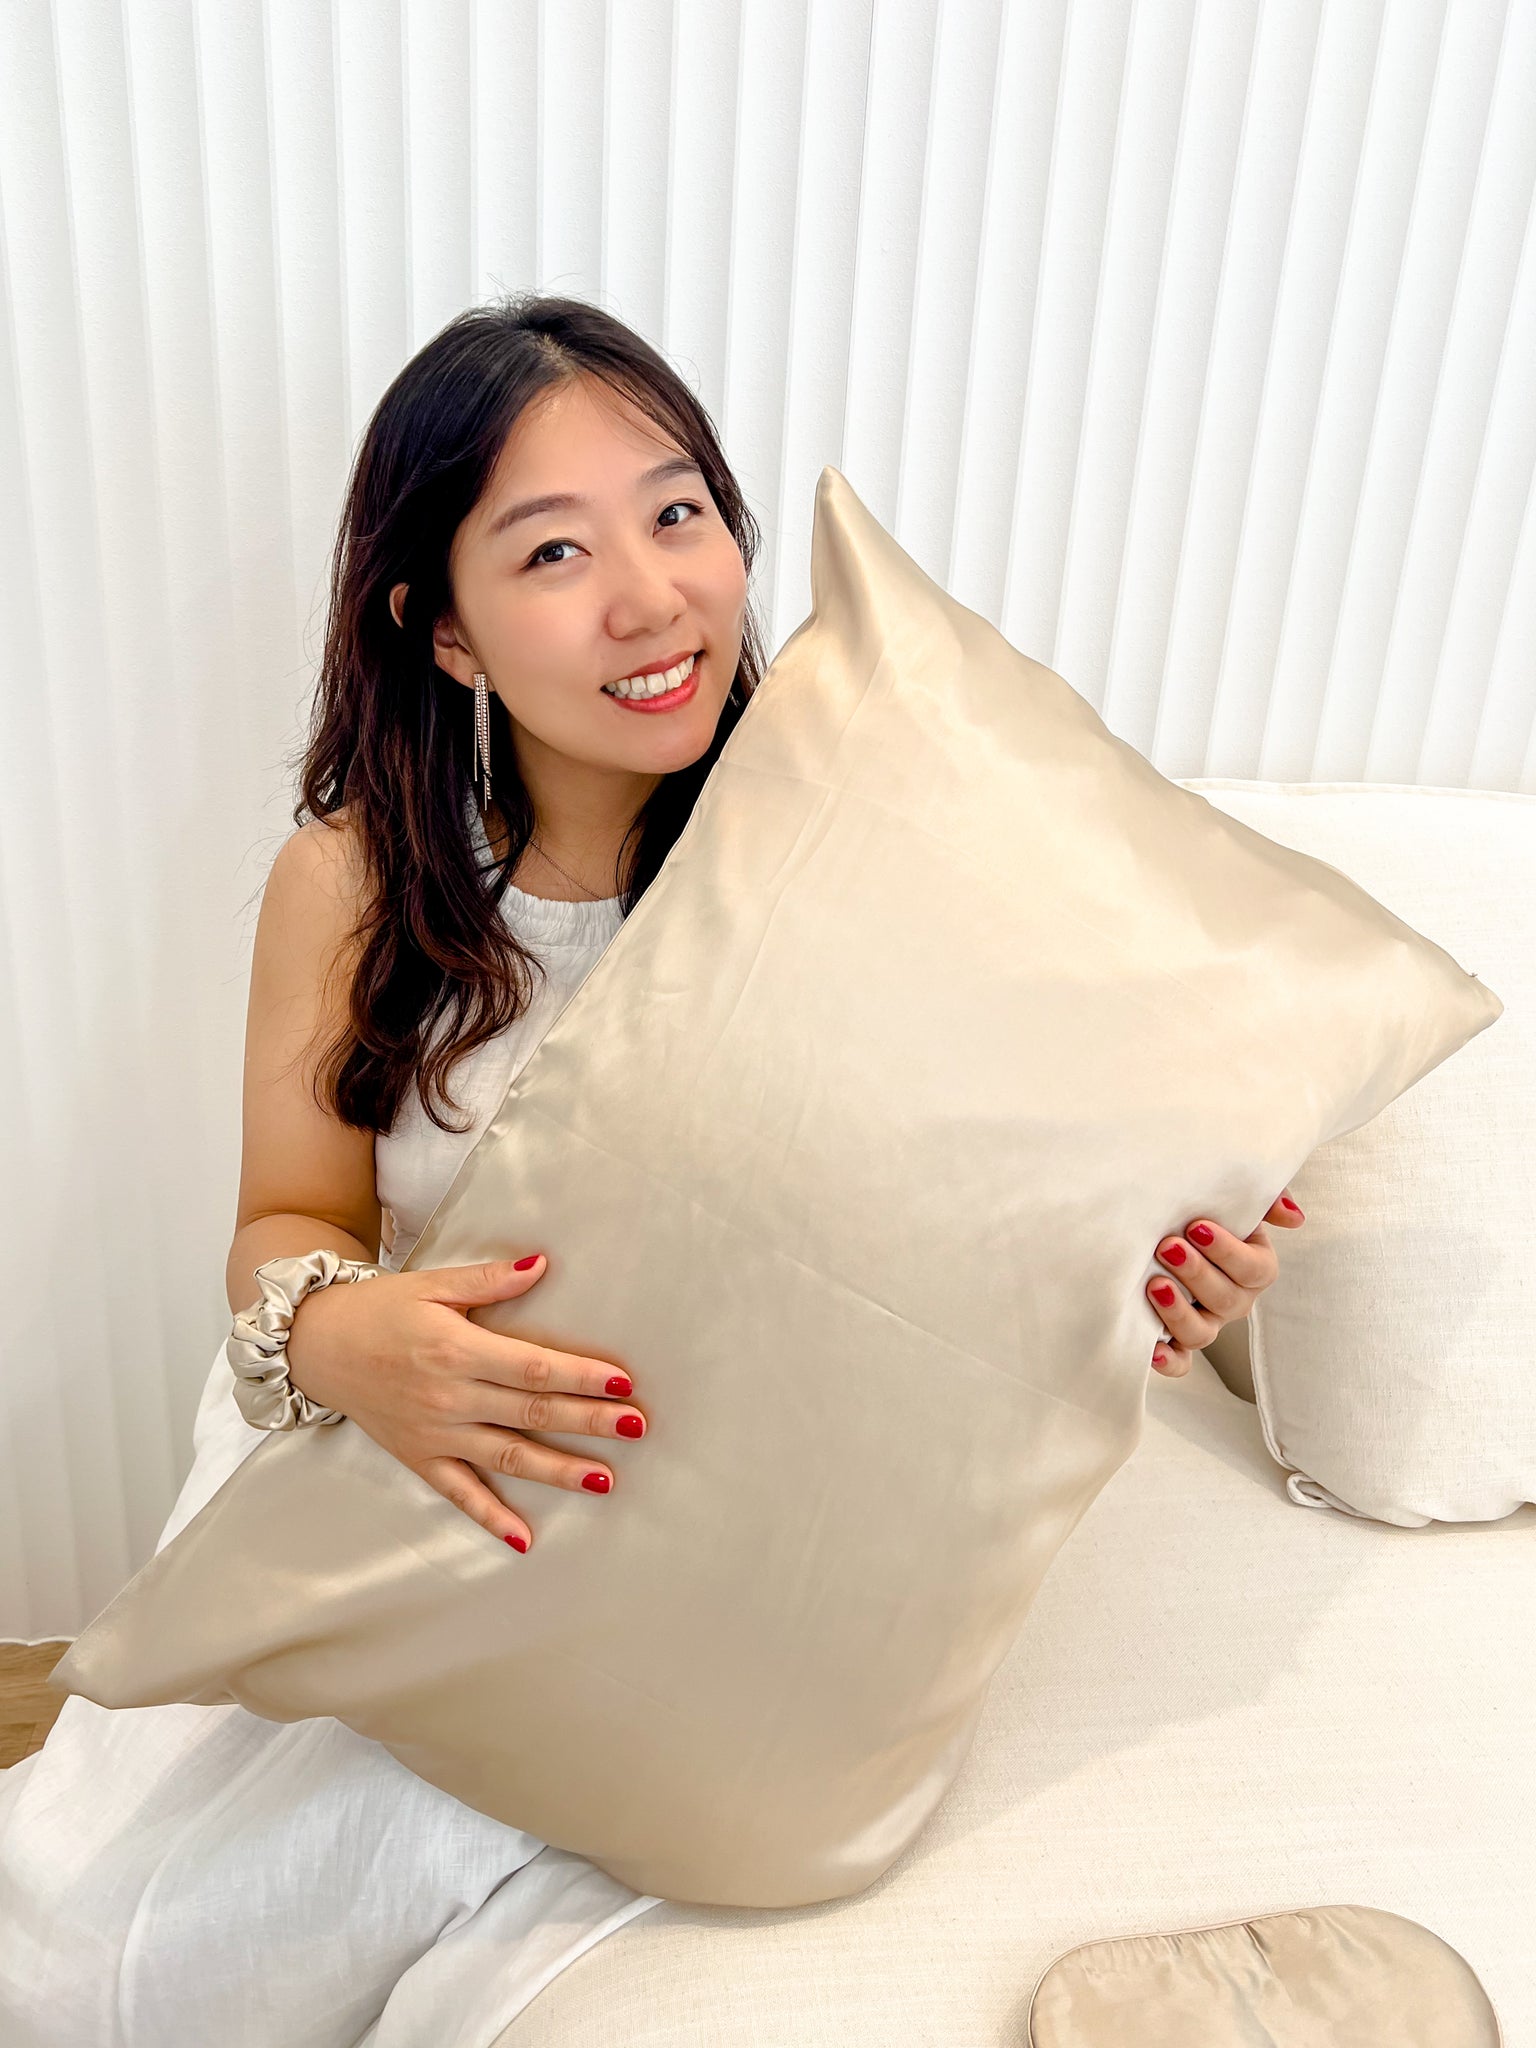 Silk Pillowcases Made From 100% Premium Mulberry Silk Have Many Benefits